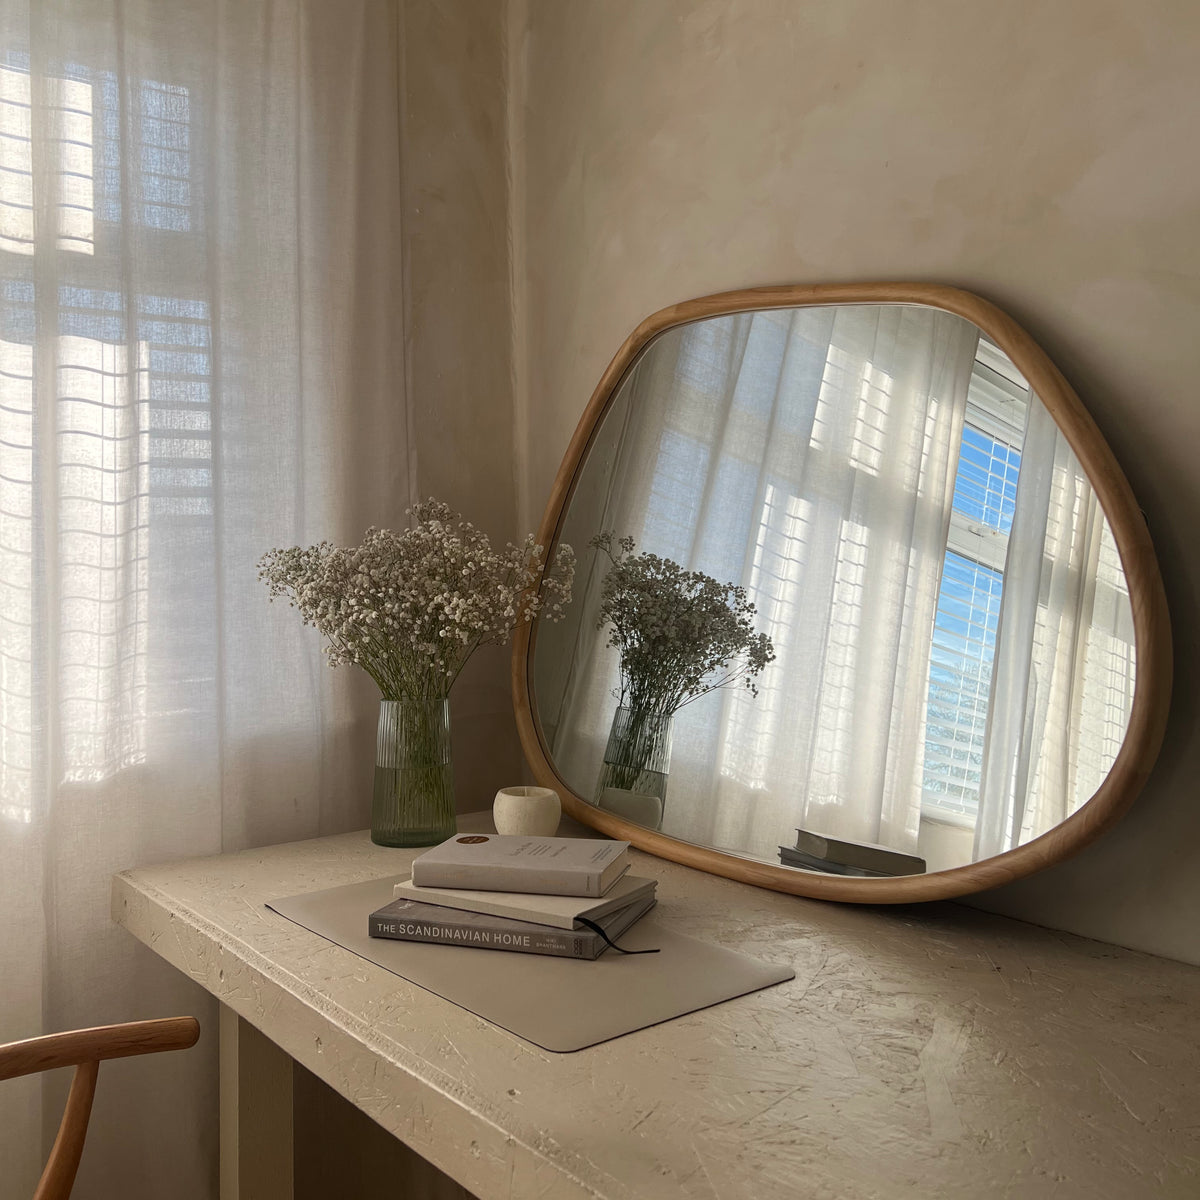 Organic irregular natural-coloured wooden mirror leaning against wall